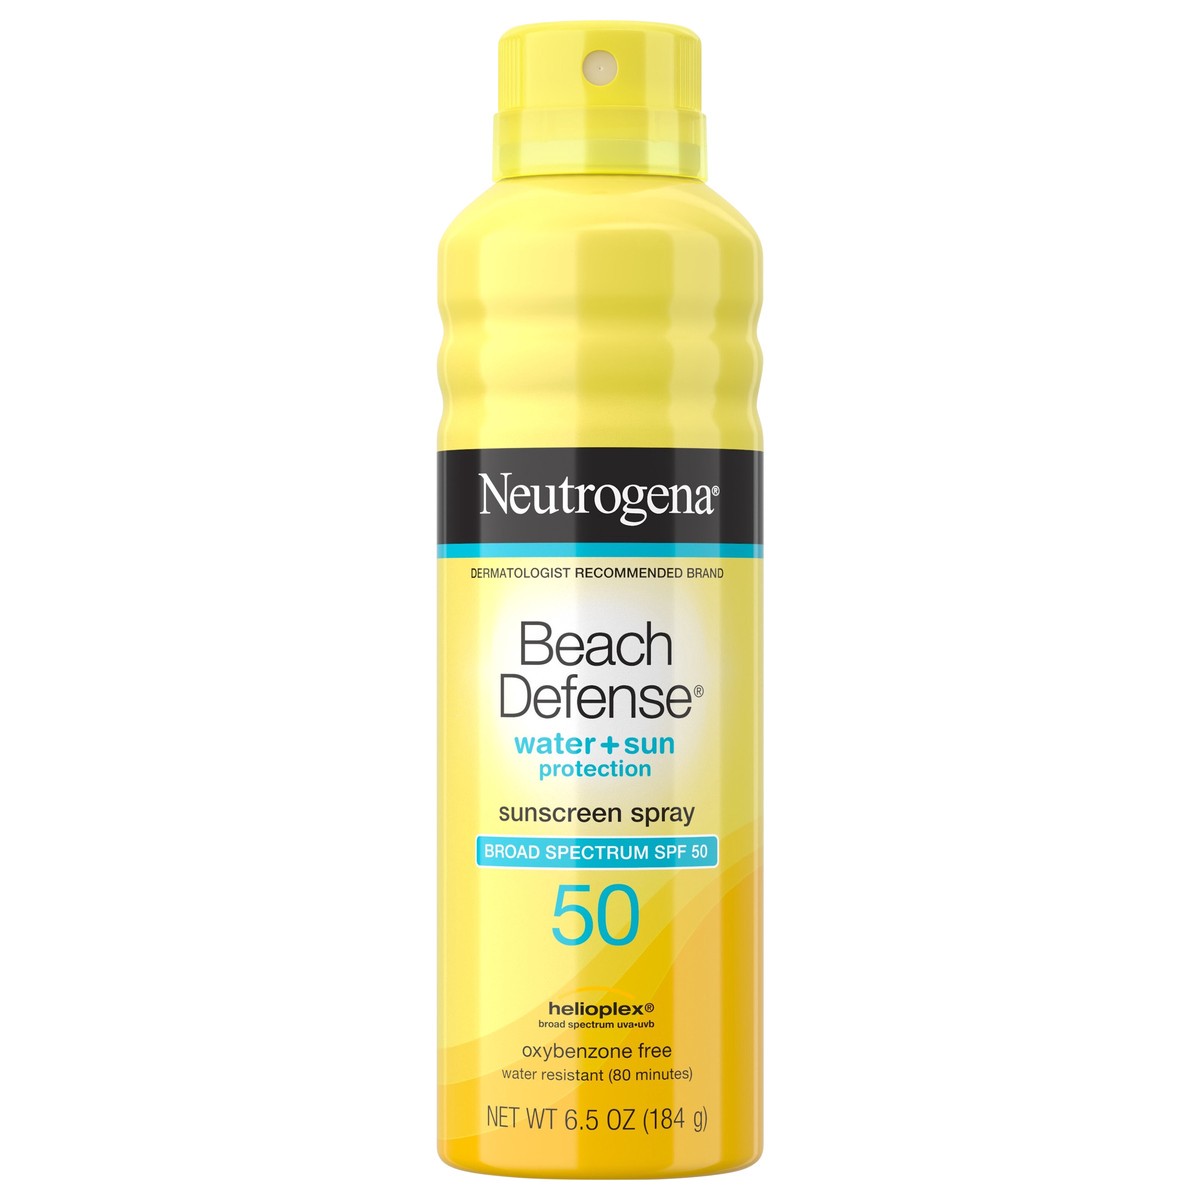 slide 3 of 5, Neutrogena Beach Defense Sunscreen Spray SPF 30 Water-Resistant Sunscreen Body Spray with Broad Spectrum SPF 50, PABA-Free, Oxybenzone-Free & Fast-Drying, Superior Sun Protection, 6.5 oz, 6.5 oz